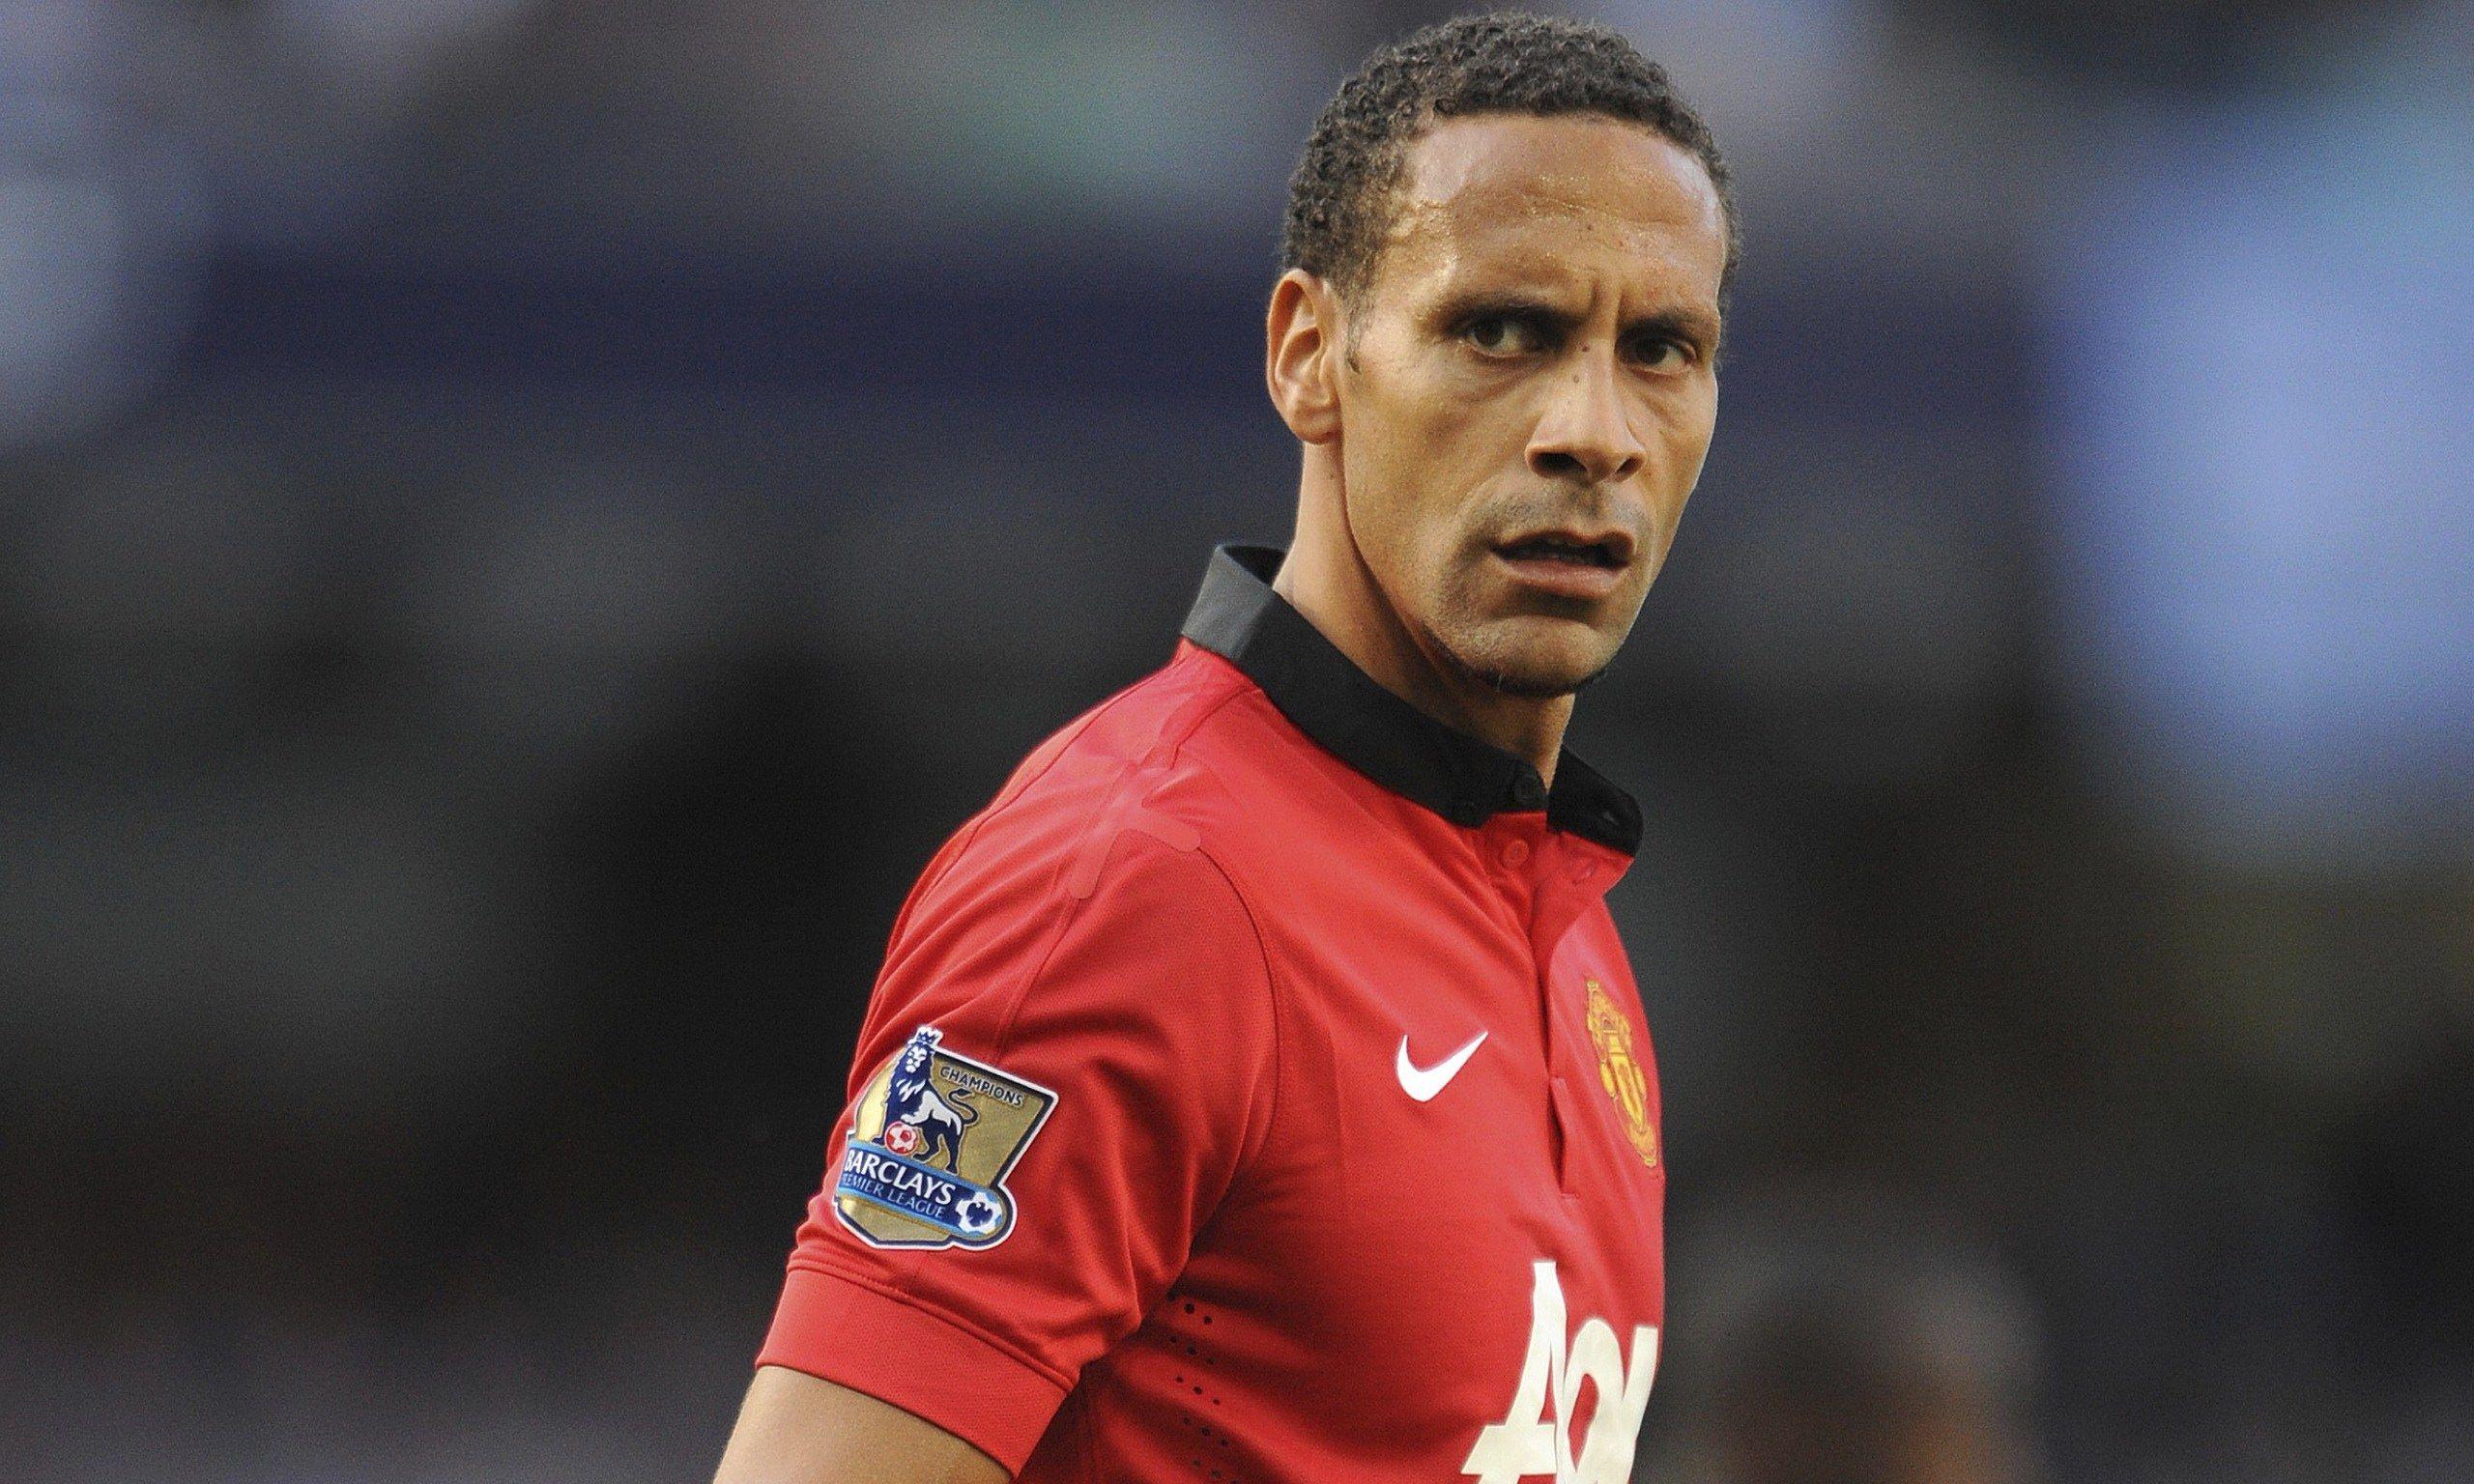 Rio Ferdinand reflects on his career and looks to the future